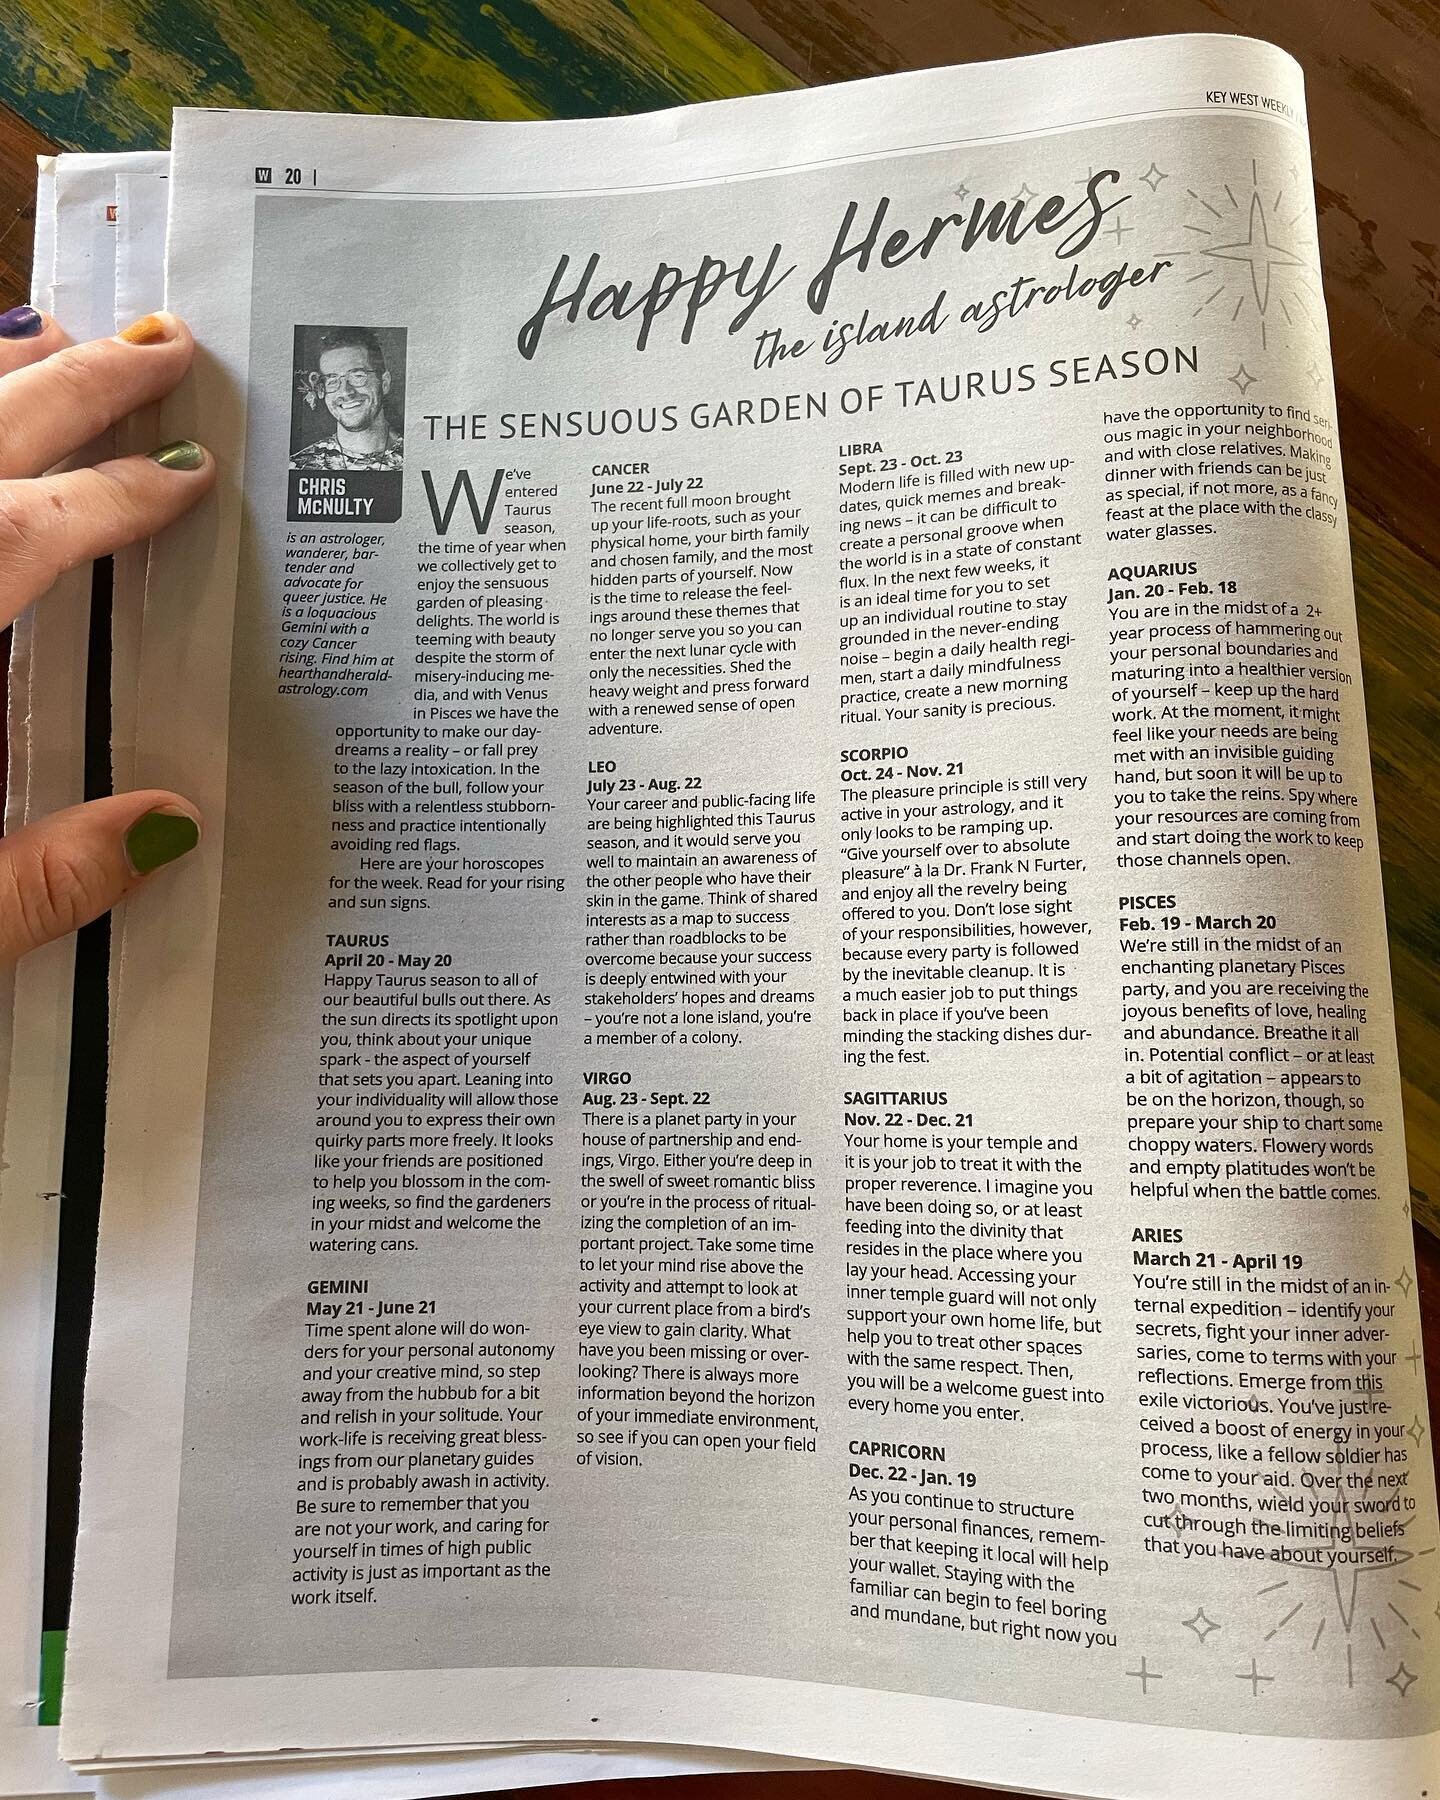 Pick up your copy of this week&rsquo;s Key West @keysweekly for your current horoscopes. And when you realize the added weight in the paper is the Keys Woman Magazine, pop that open also and read through a birth chart 101 article I wrote for them for